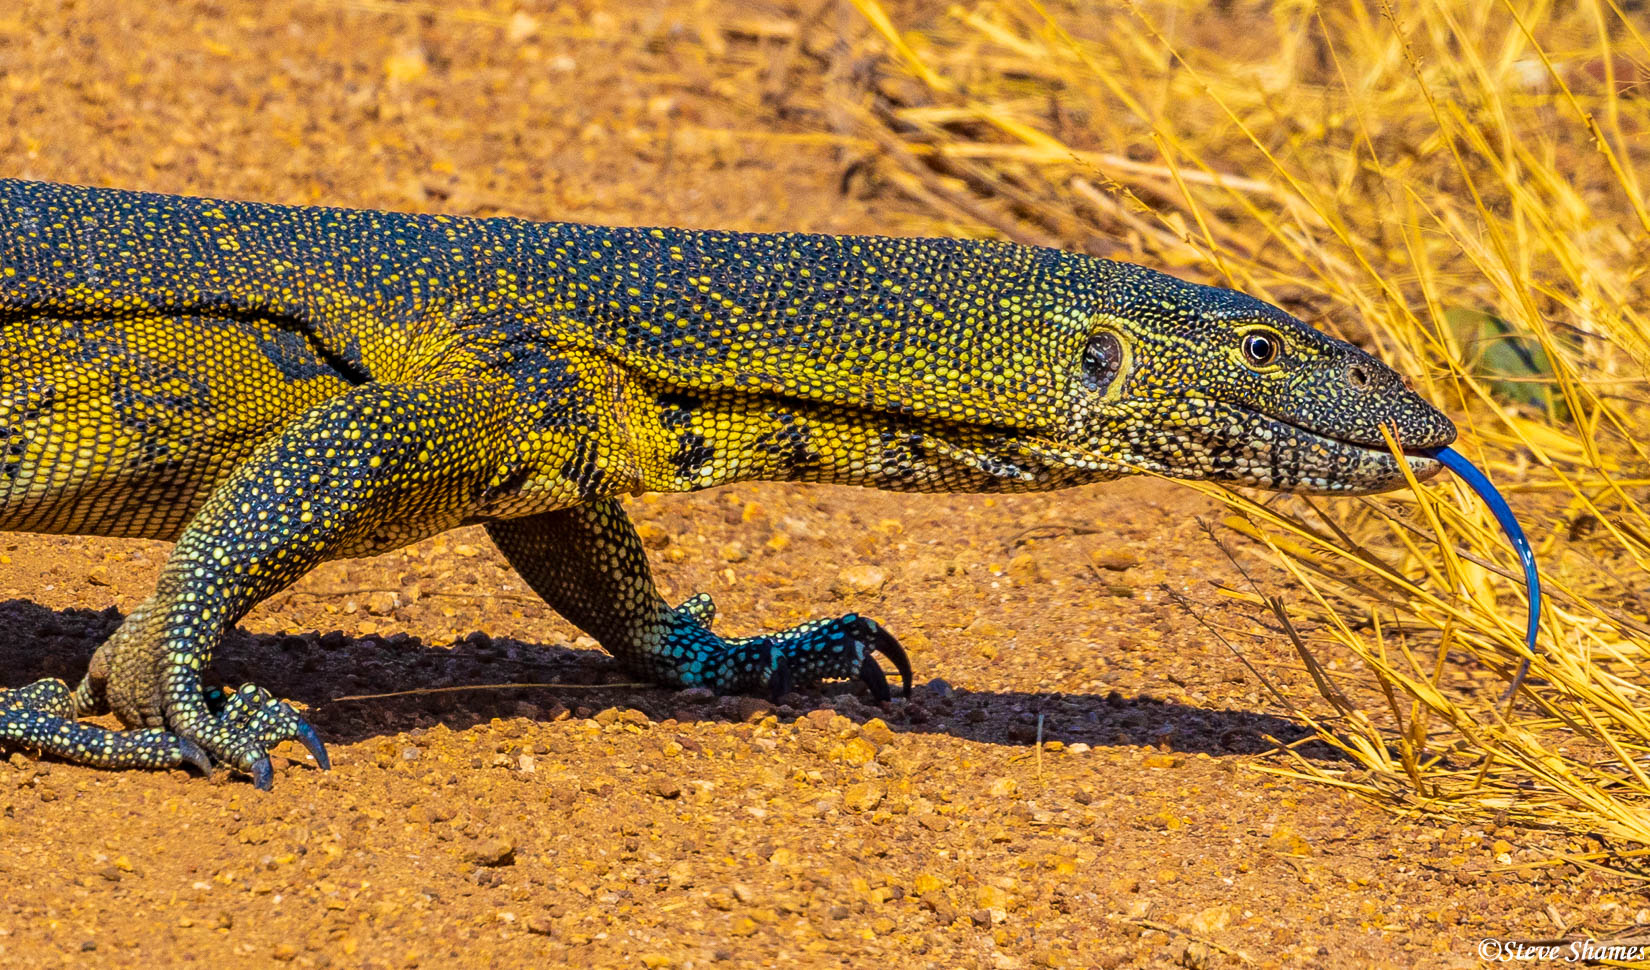 Monitor lizard crossing the road. I have never seen a tongue so blue.